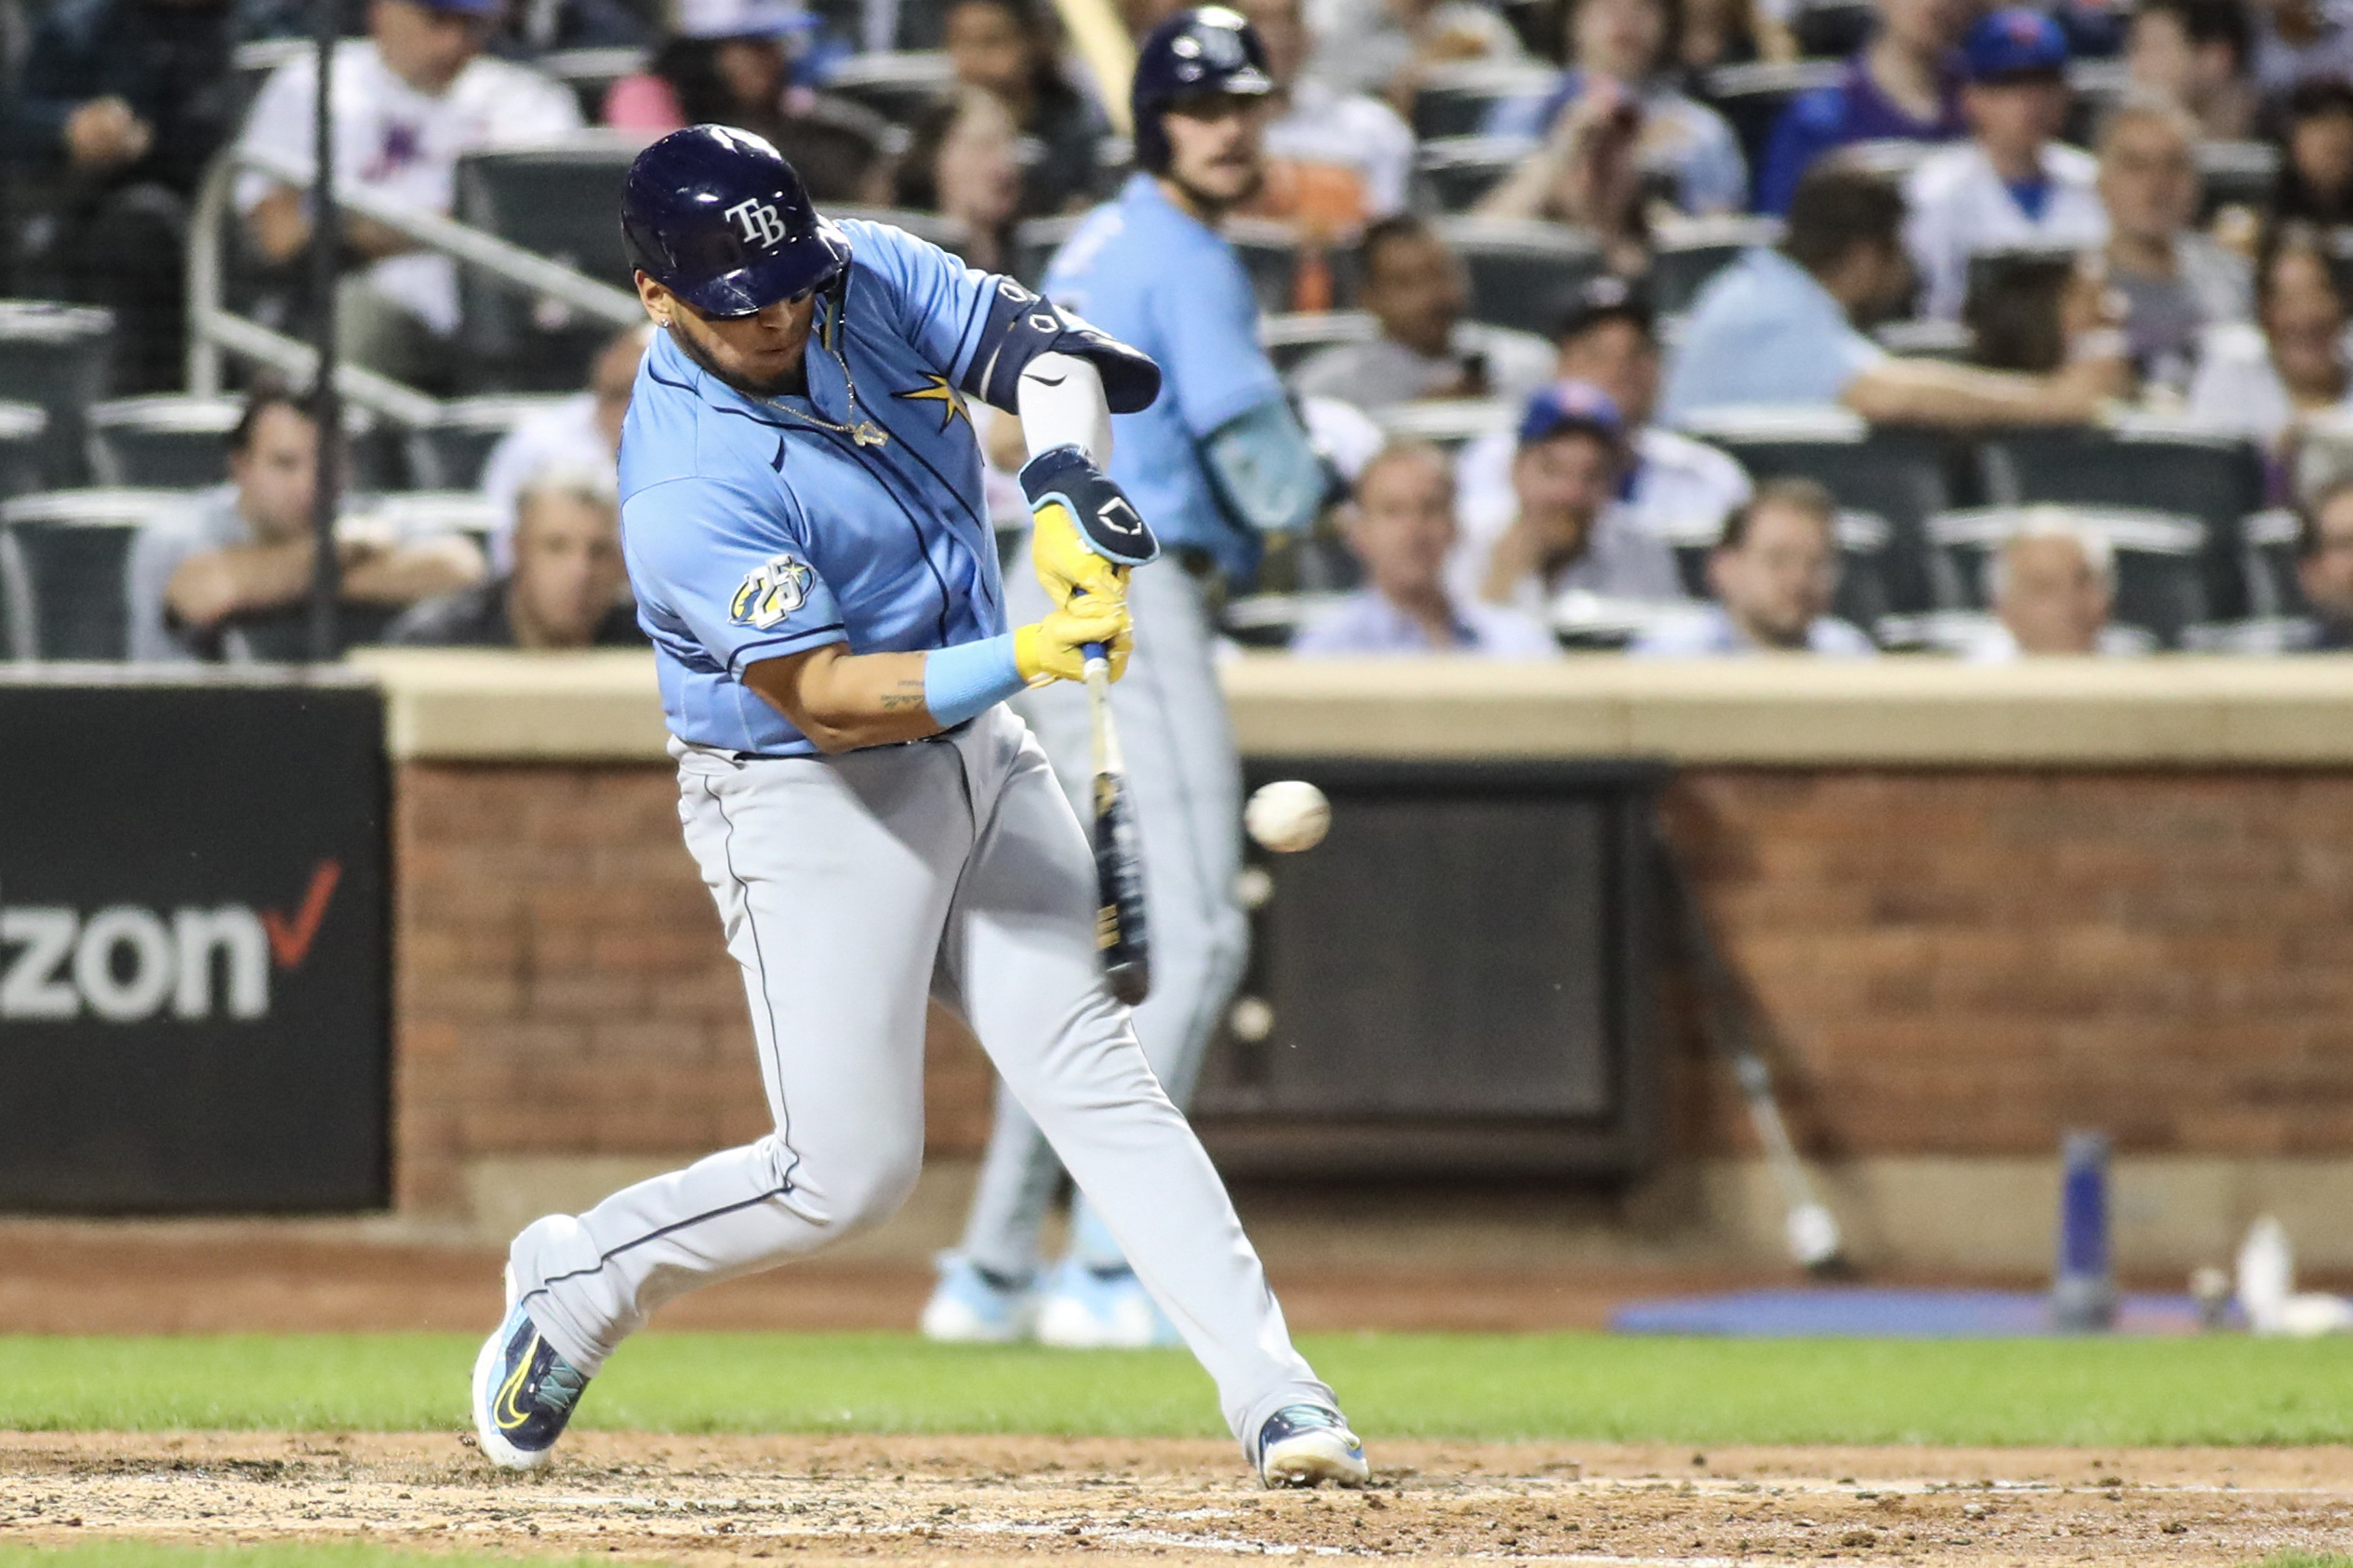 Paredes has 2 homers, 5 RBIs as Rays hammer Verlander and Mets 8-5